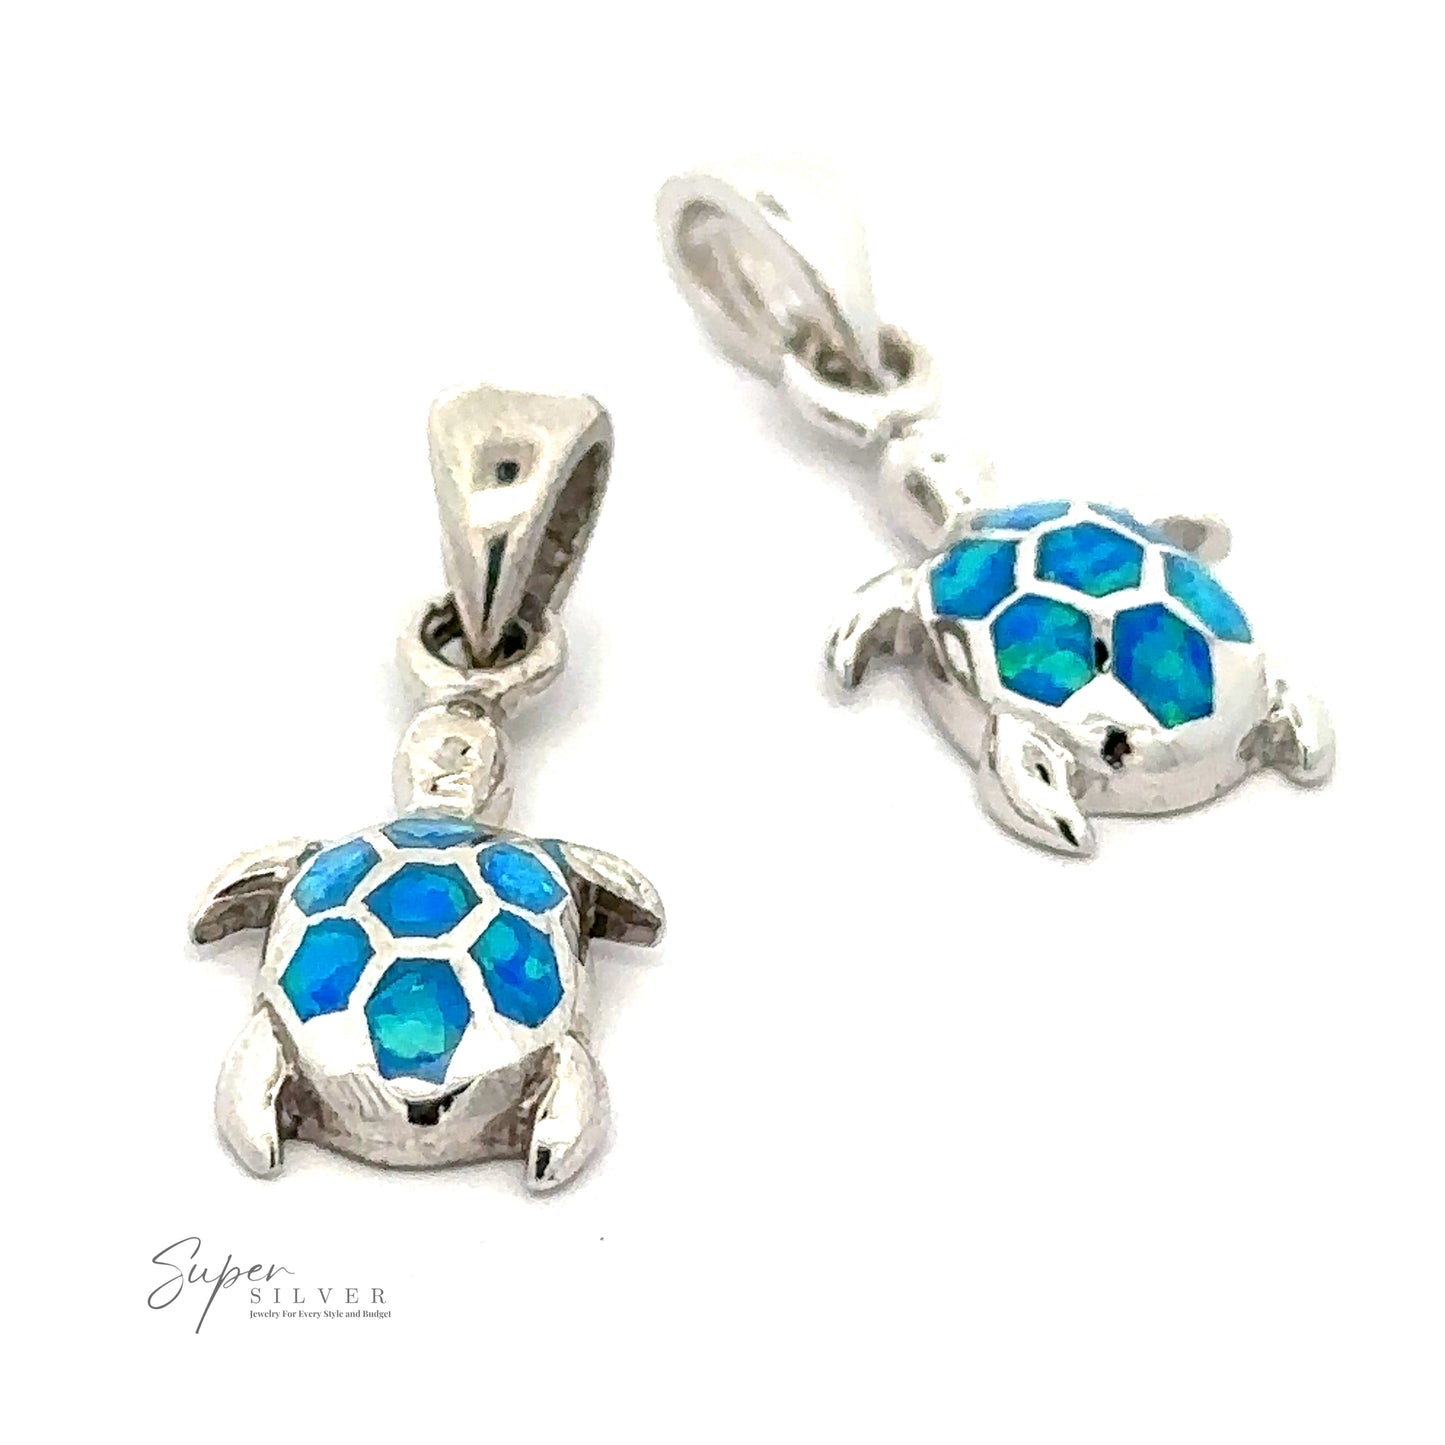 
                  
                    Two silver turtle pendants with blue opal stones creating a mosaic shell design. One pendant is lying flat, while the other stands upright, capturing the beauty of marine life. The Dainty Blue Opal Sea Turtle Pendant adds an elegant touch to any outfit.
                  
                